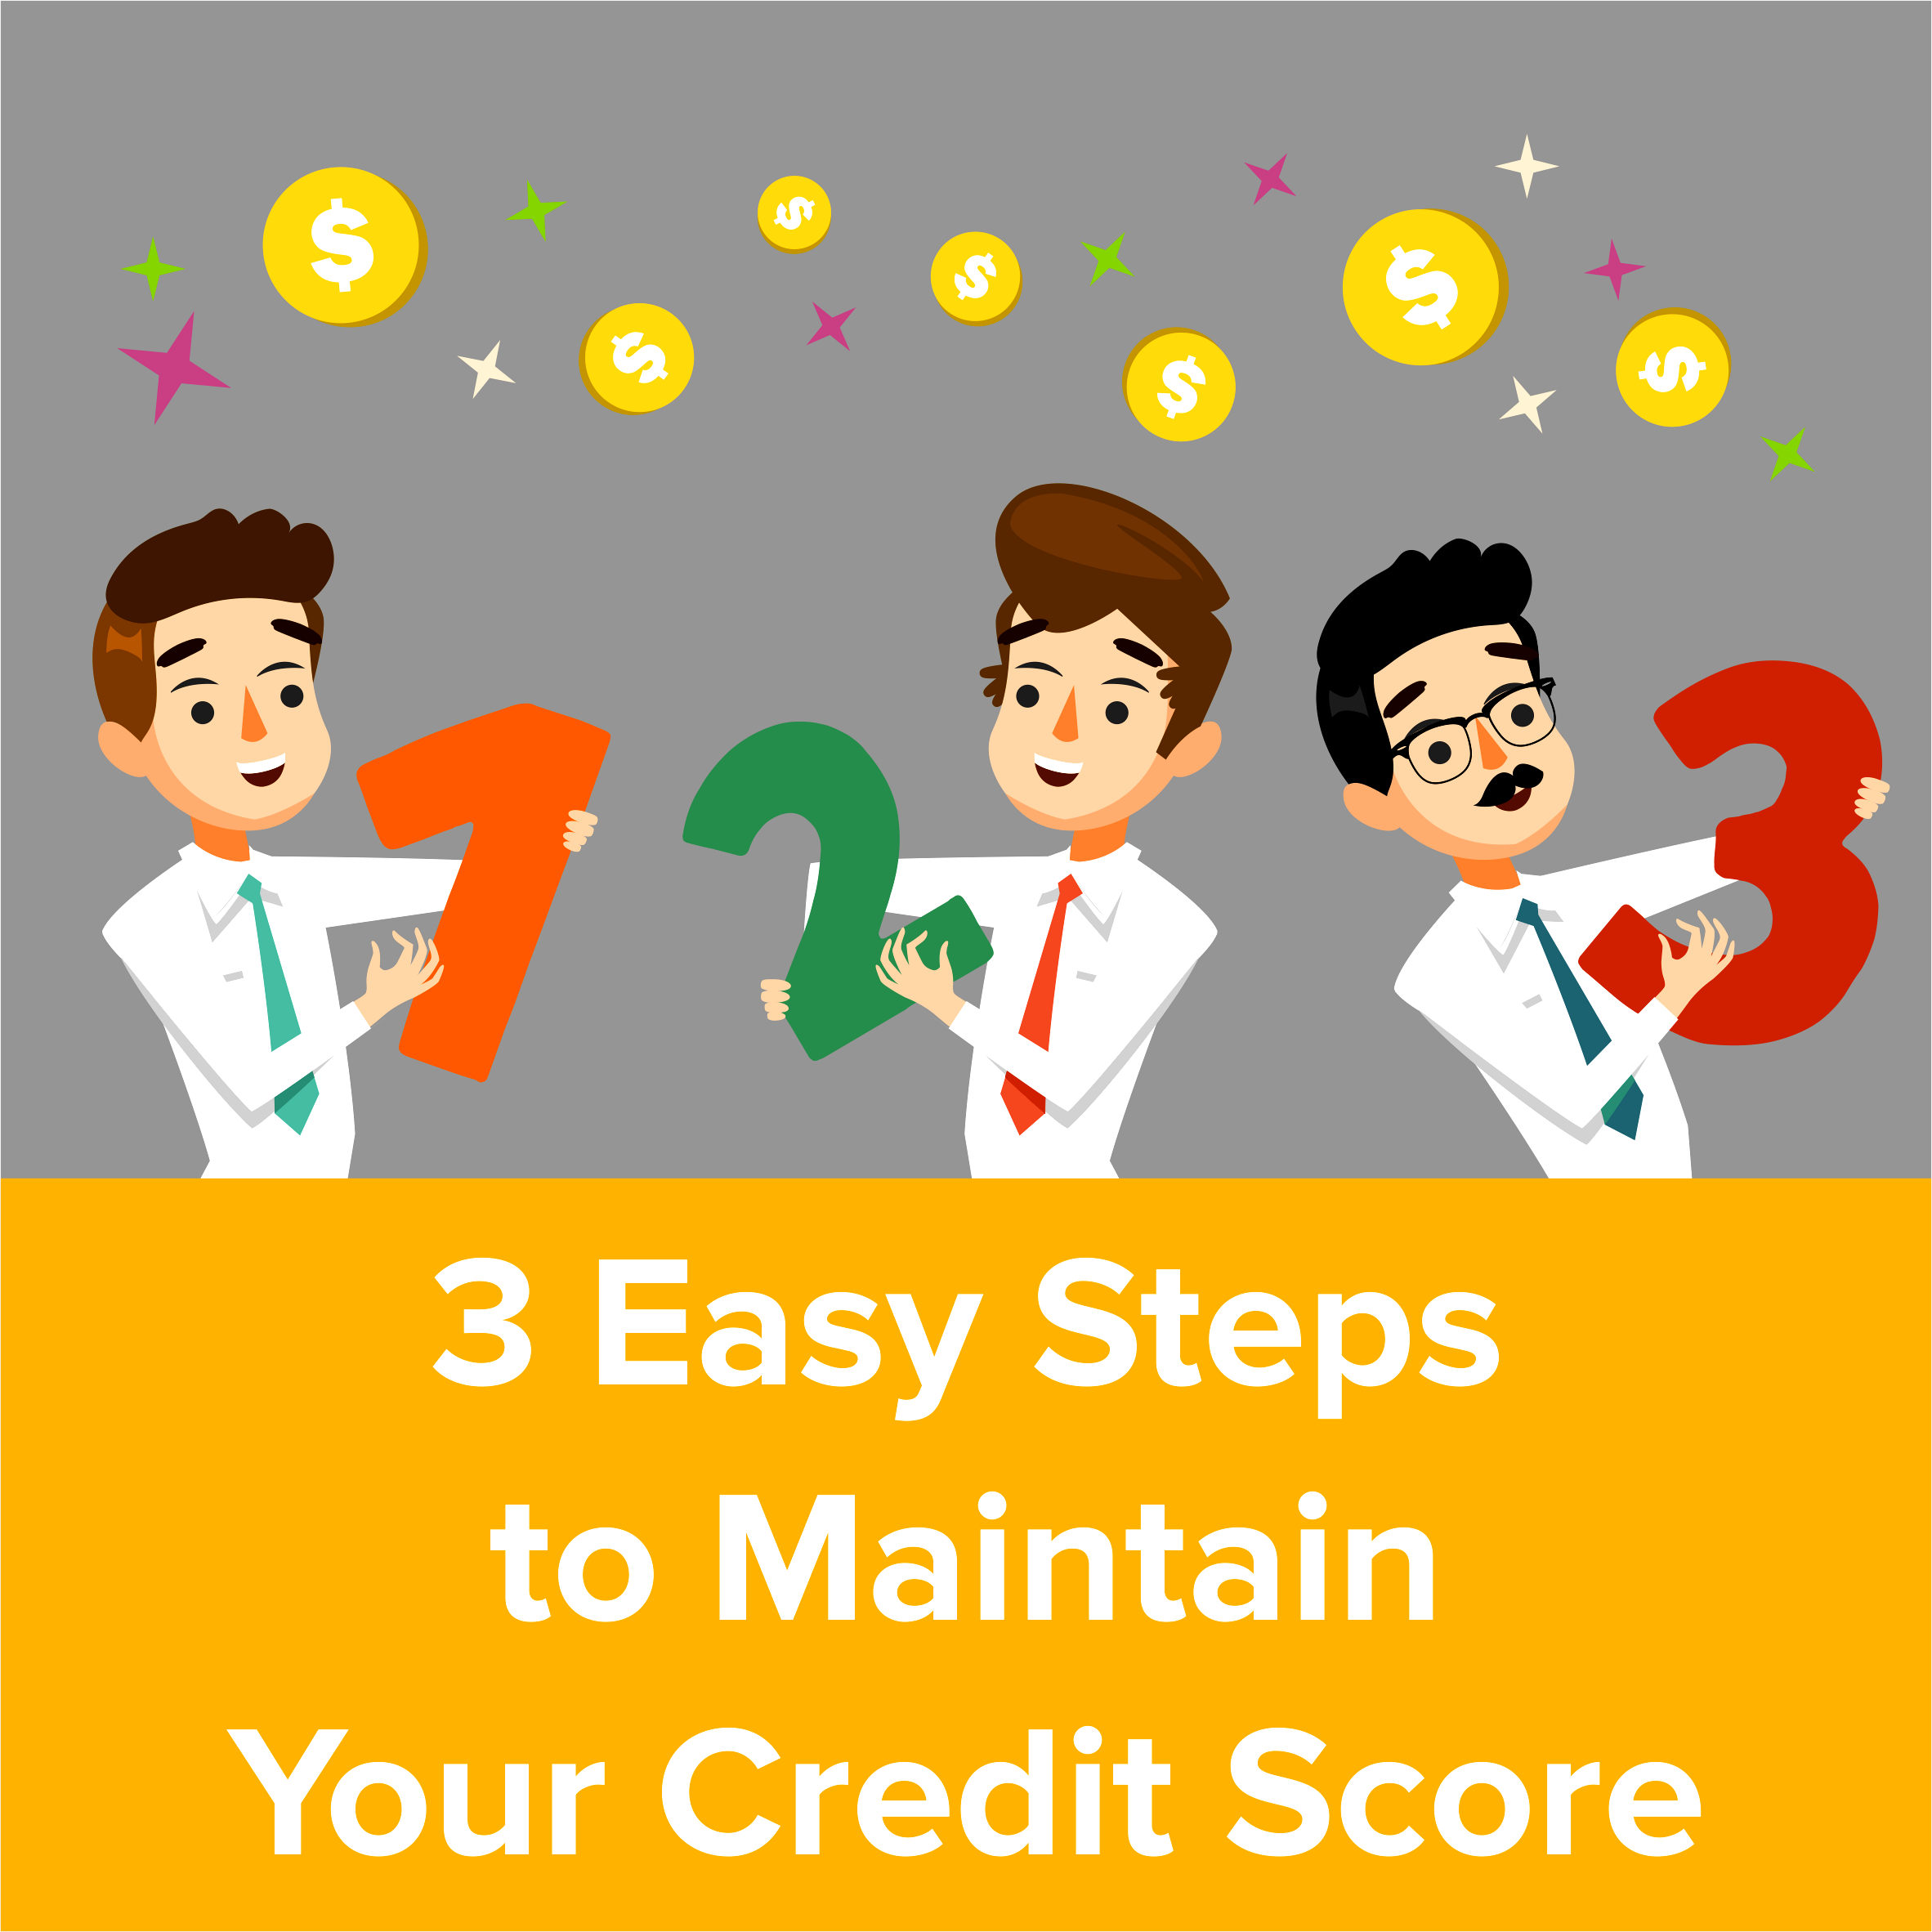 3 Easy Steps to Maintain Your Credit Score